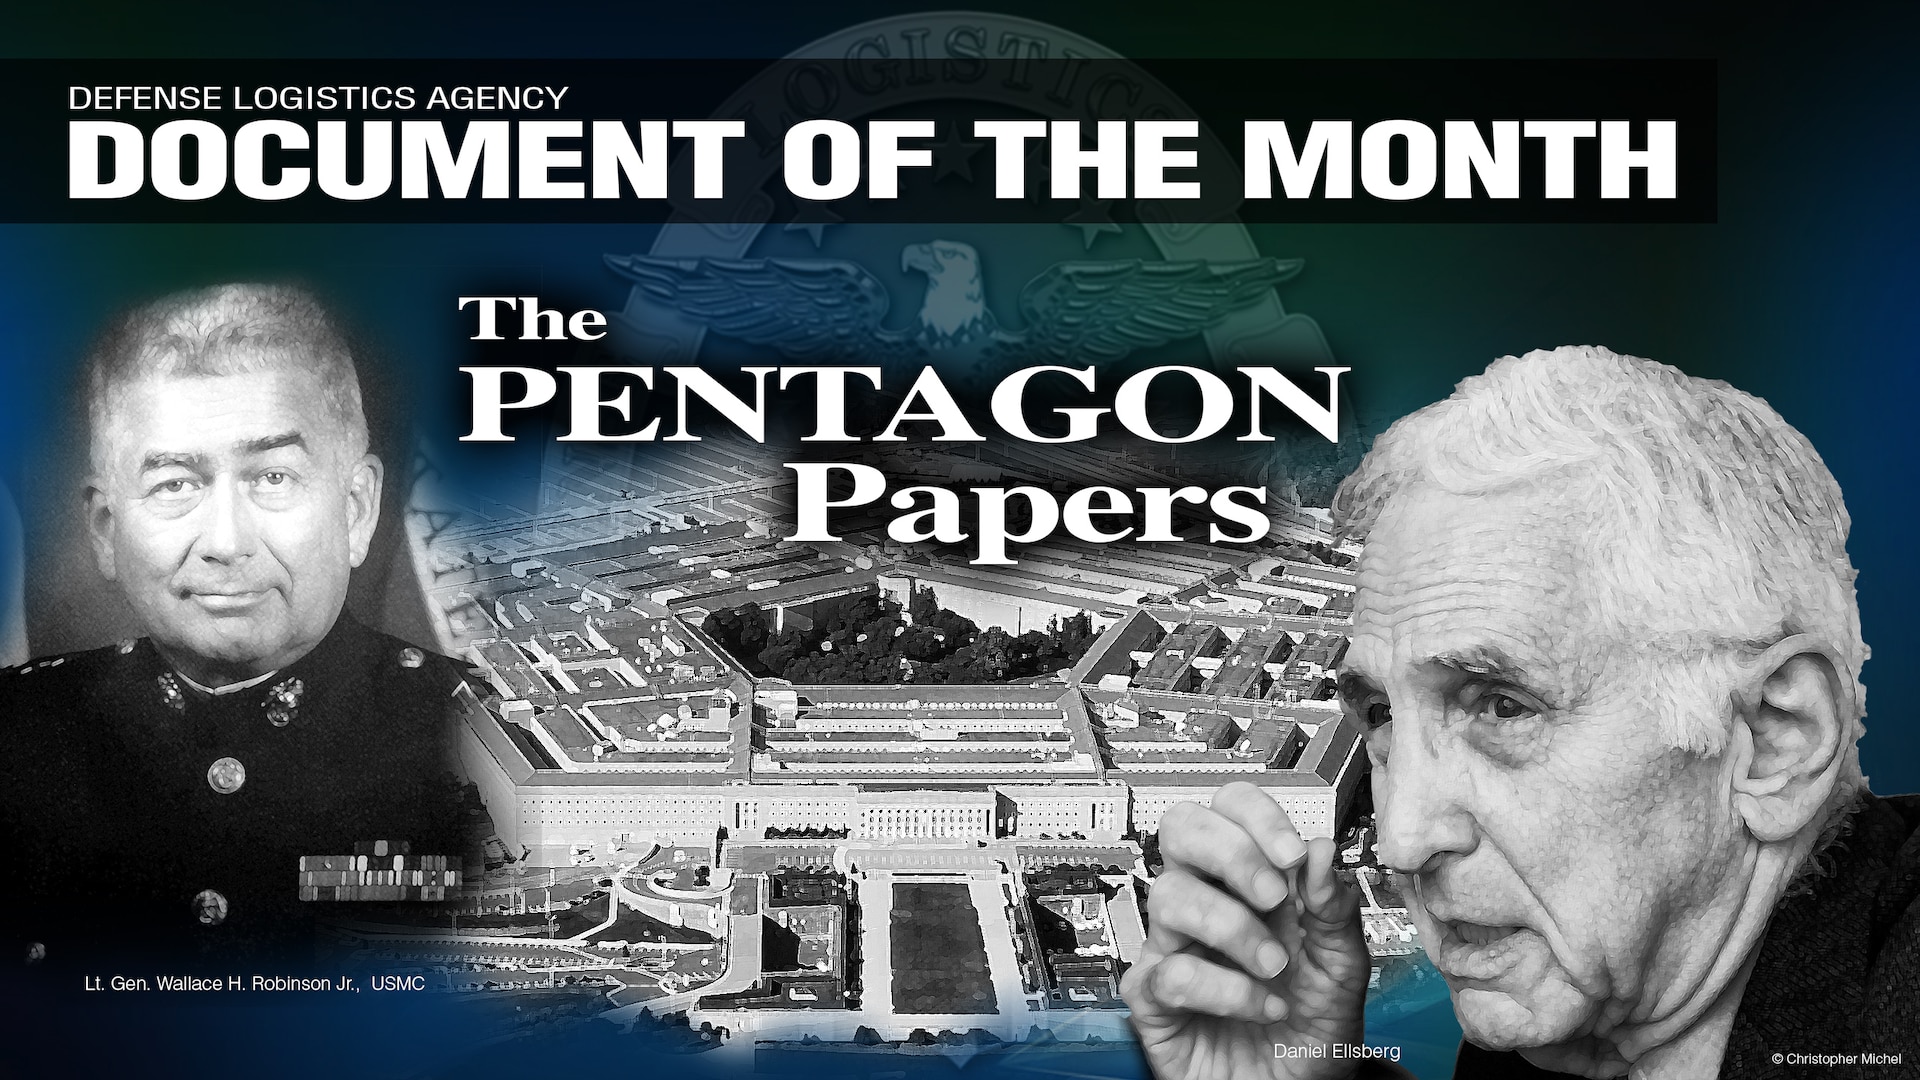 Images of The Pentagon, Lt. Gen. Wallace H. Robinson and Daniel Ellsberg are accompanied by text saying Defense Logistics Agency Document of the Month: The Pentagon Papers